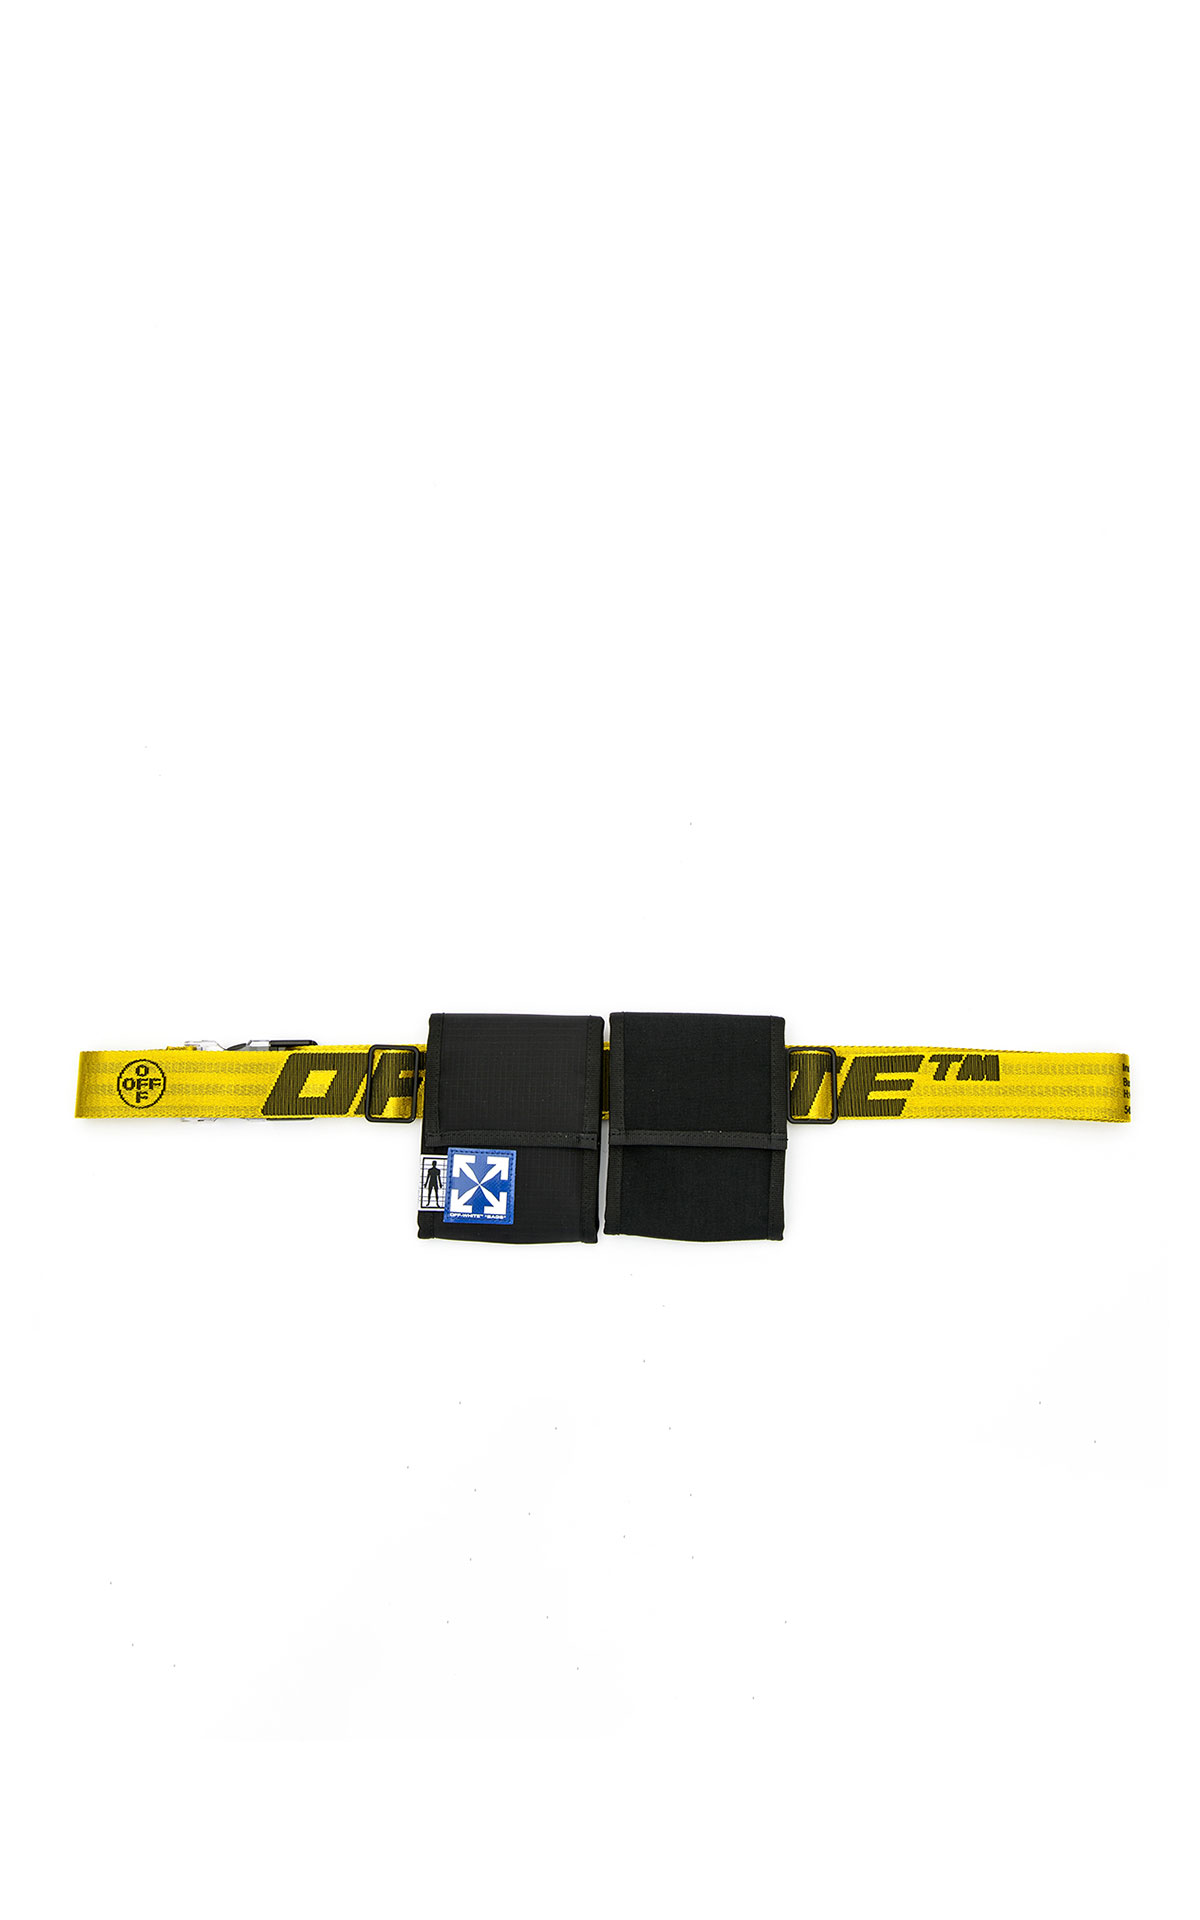 Off-White Two pocket fannypack black yellow from Bicester Village